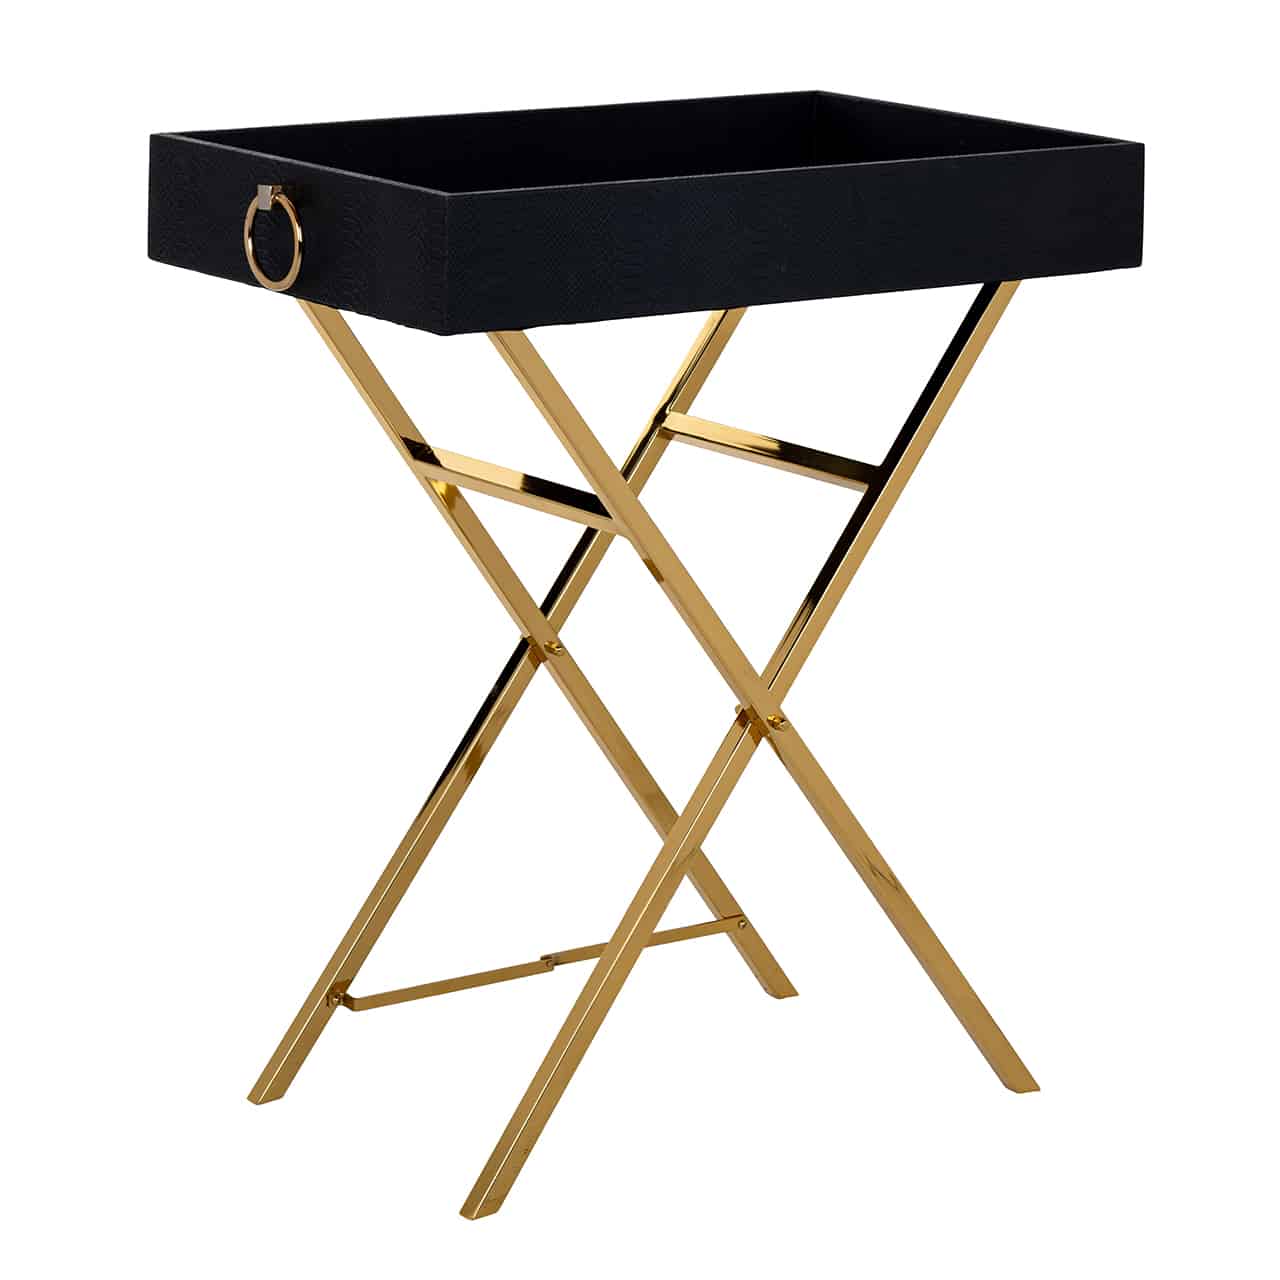 Black and Gold Snake Skin Tray Table